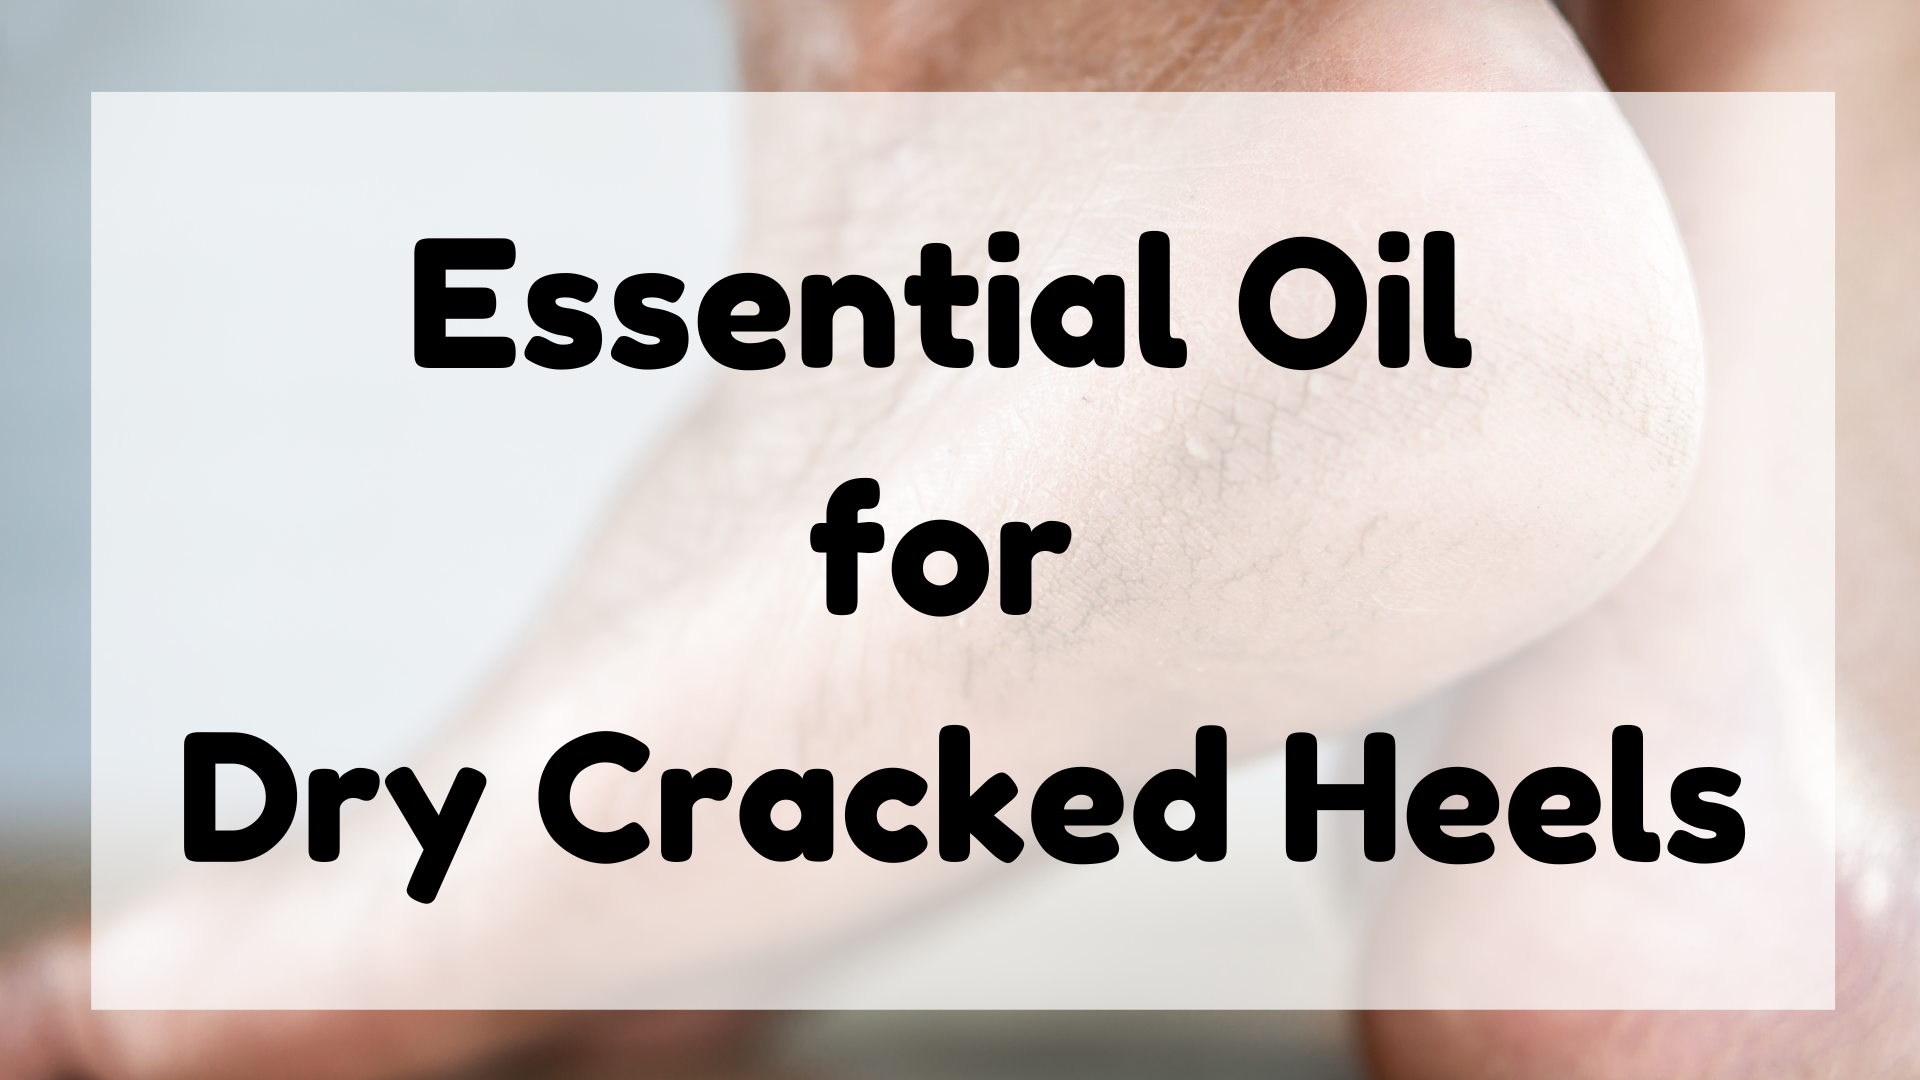 Essential Oil for Dry Cracked Heels featured image